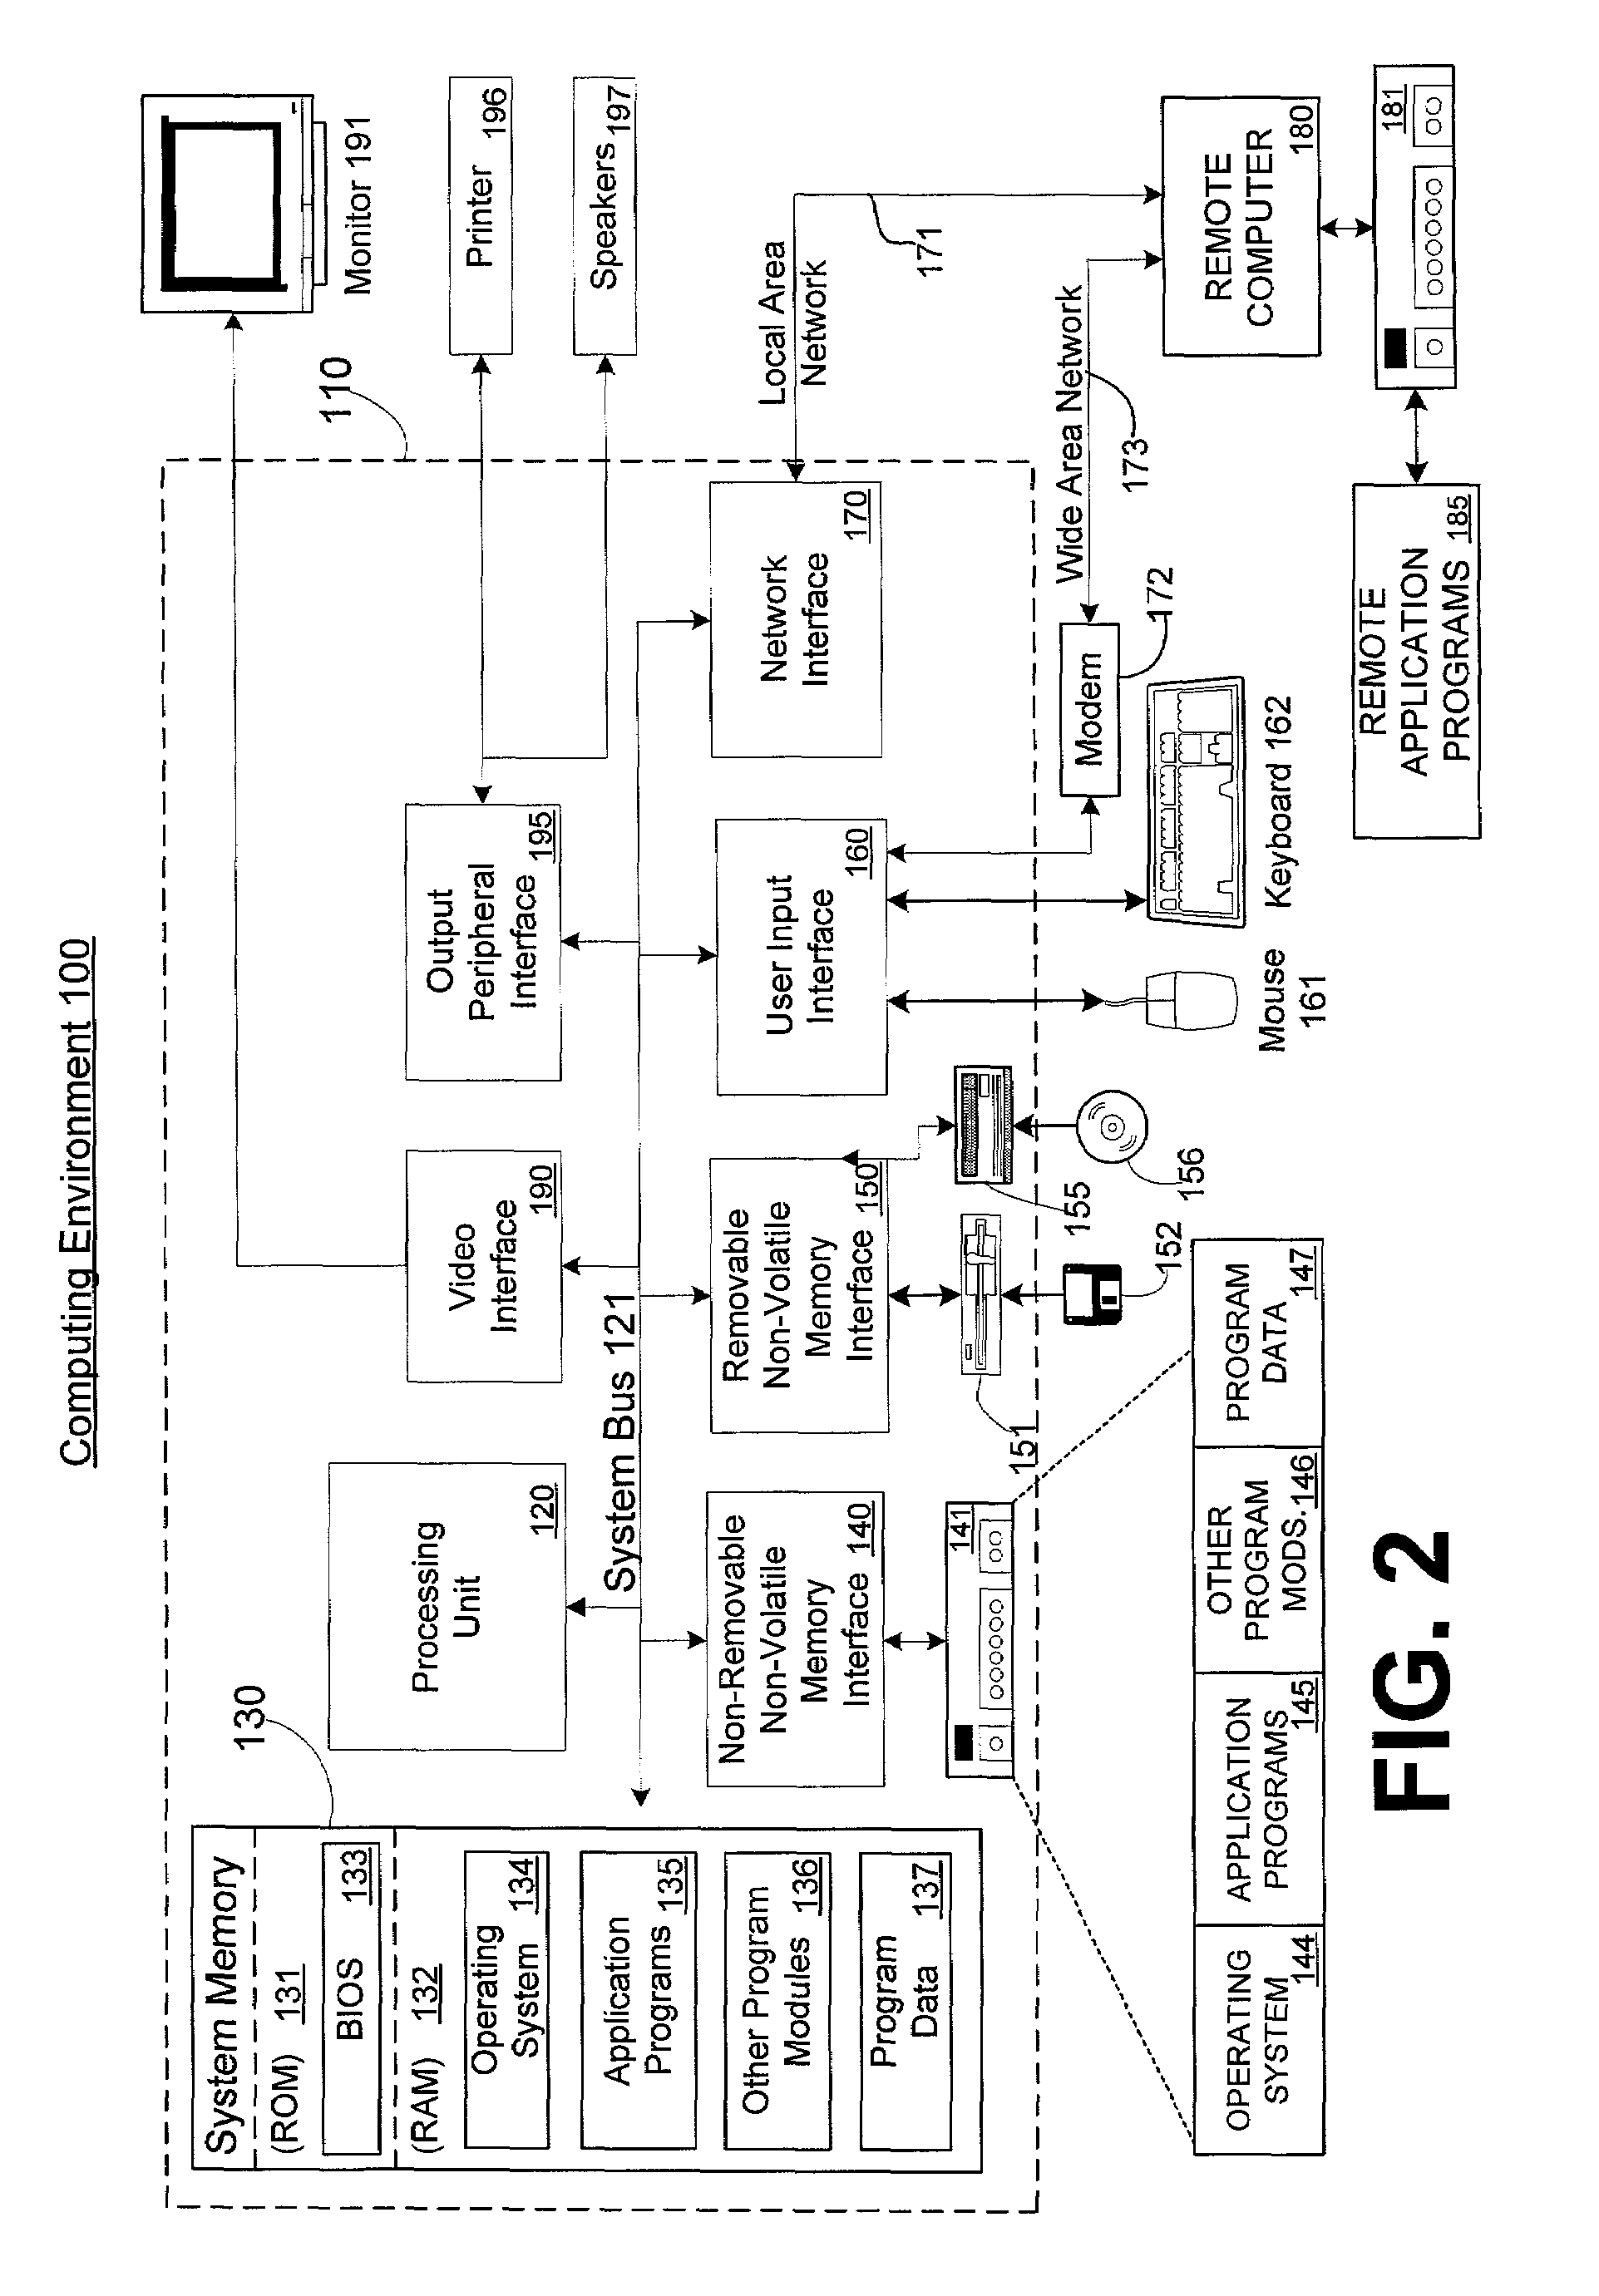 System and methods for providing dynamic authorization in a computer system